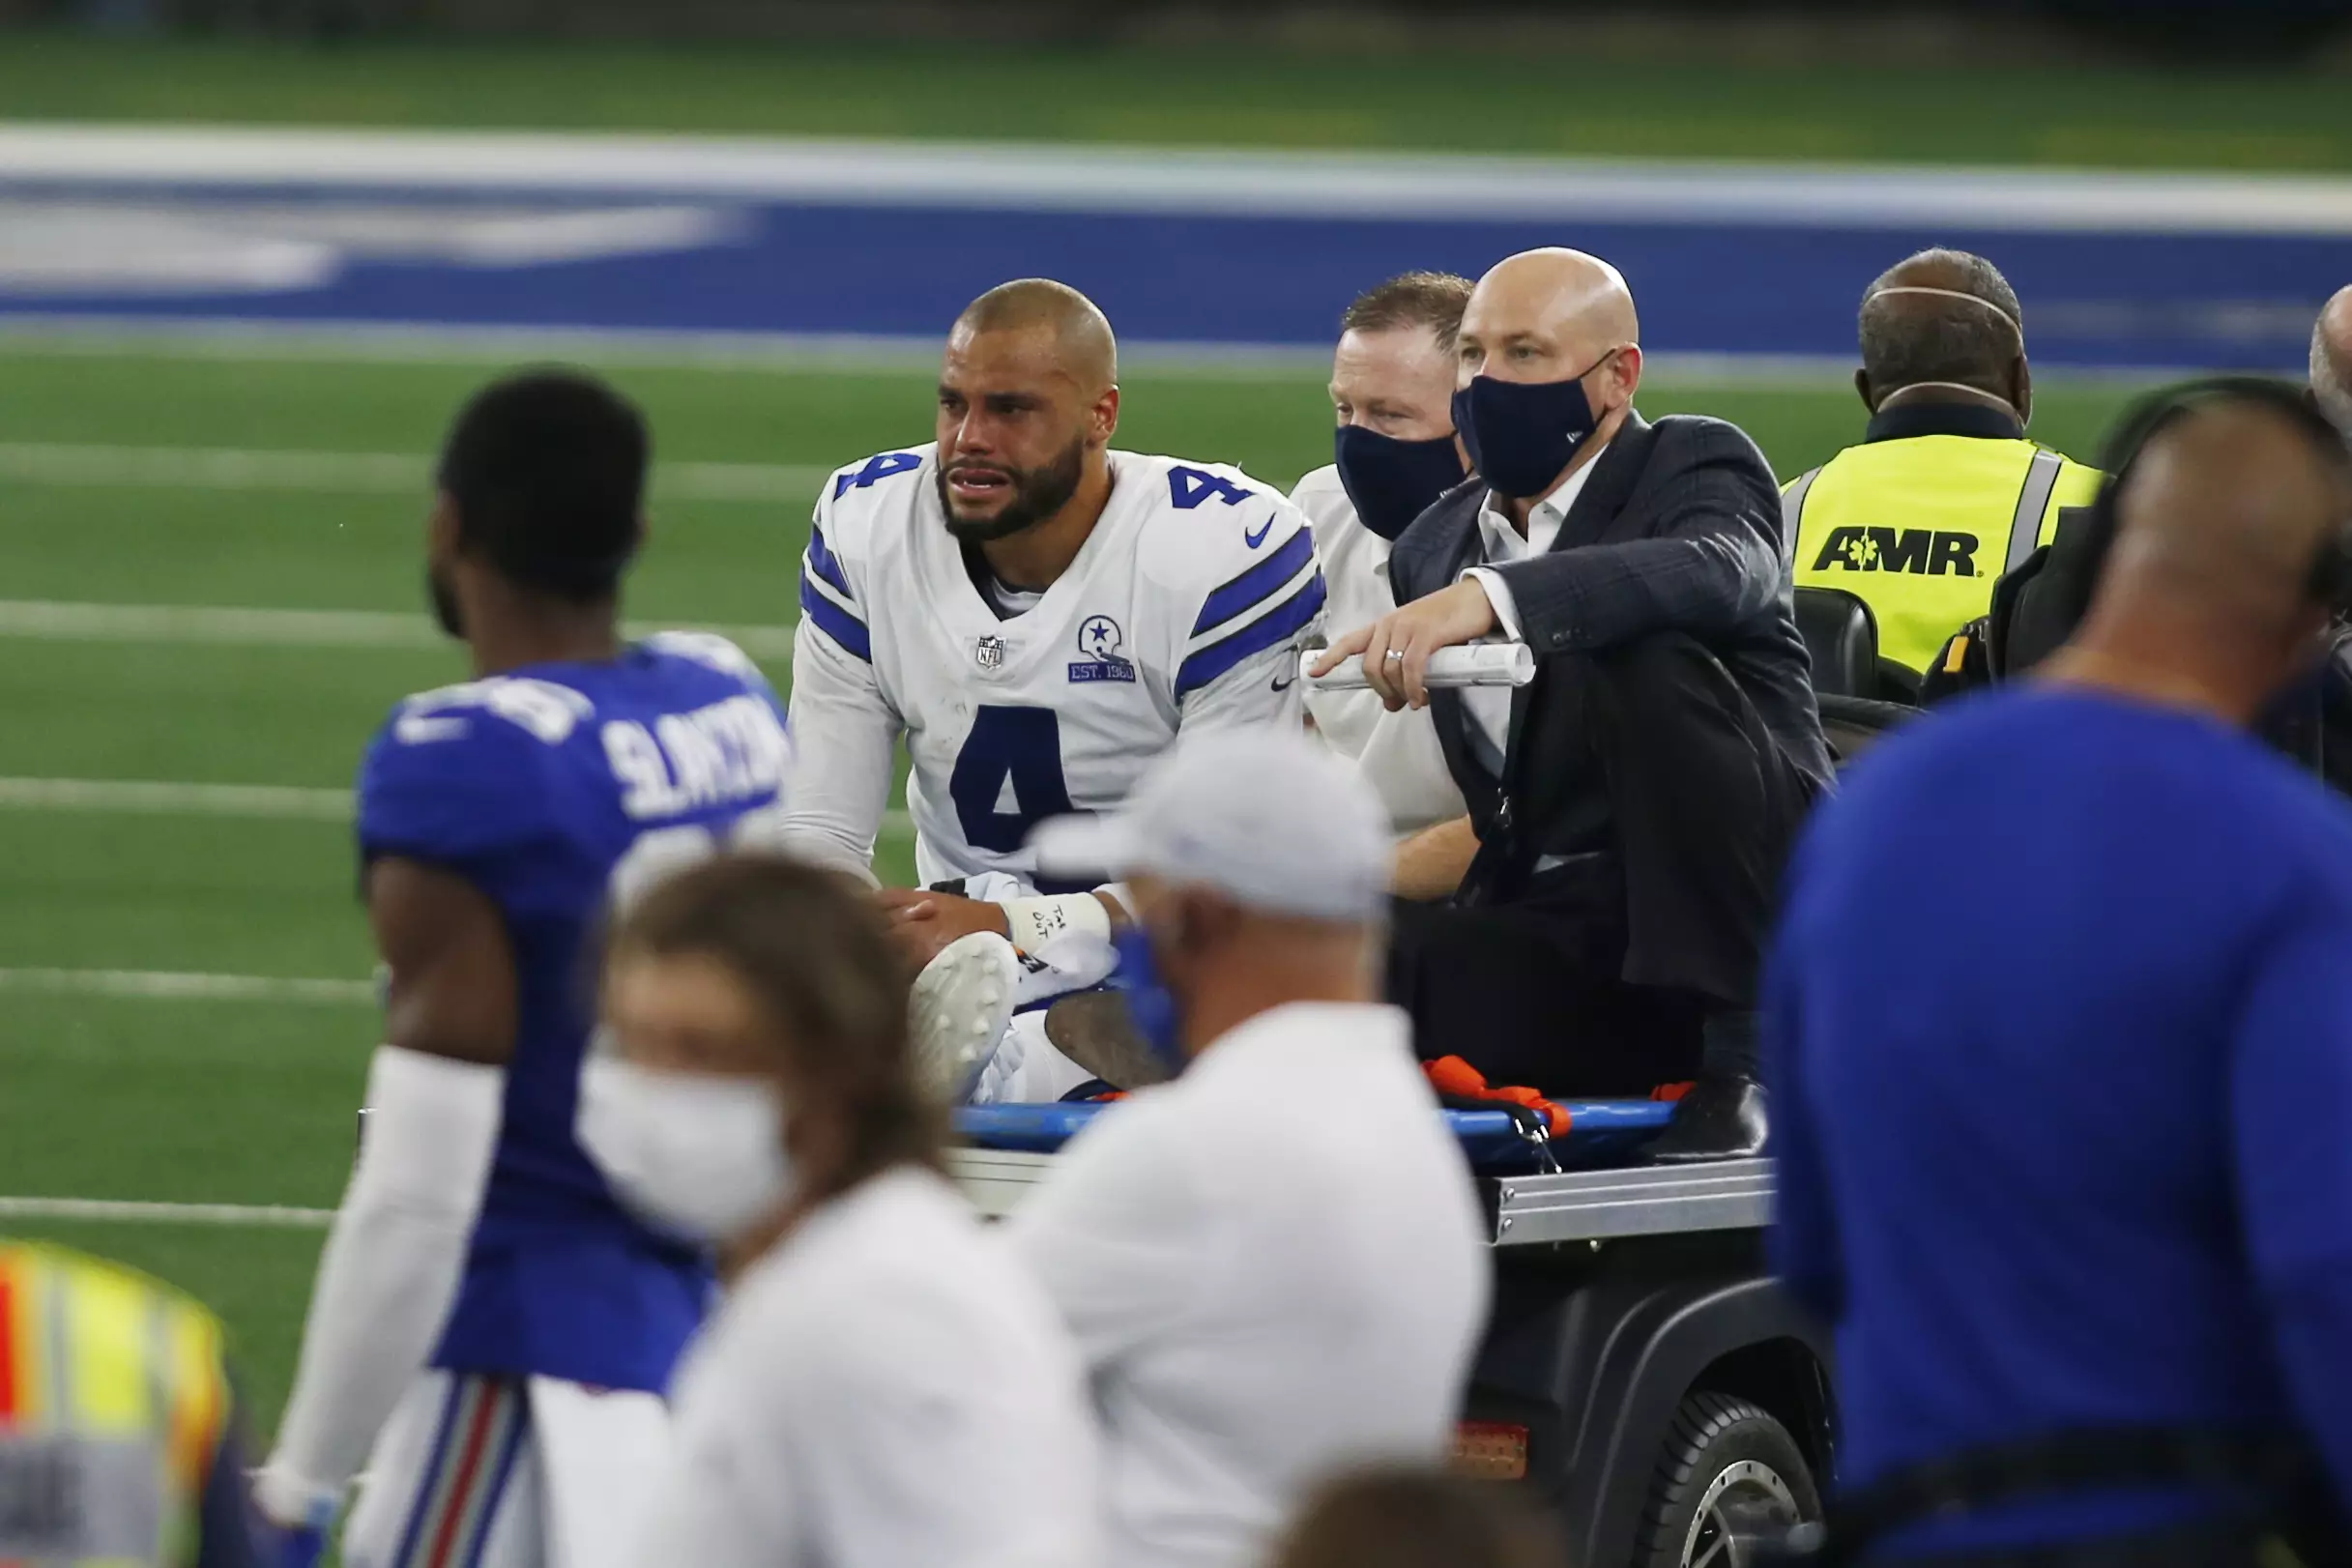 An emotional Dak Prescott was brought to tears following the injury.